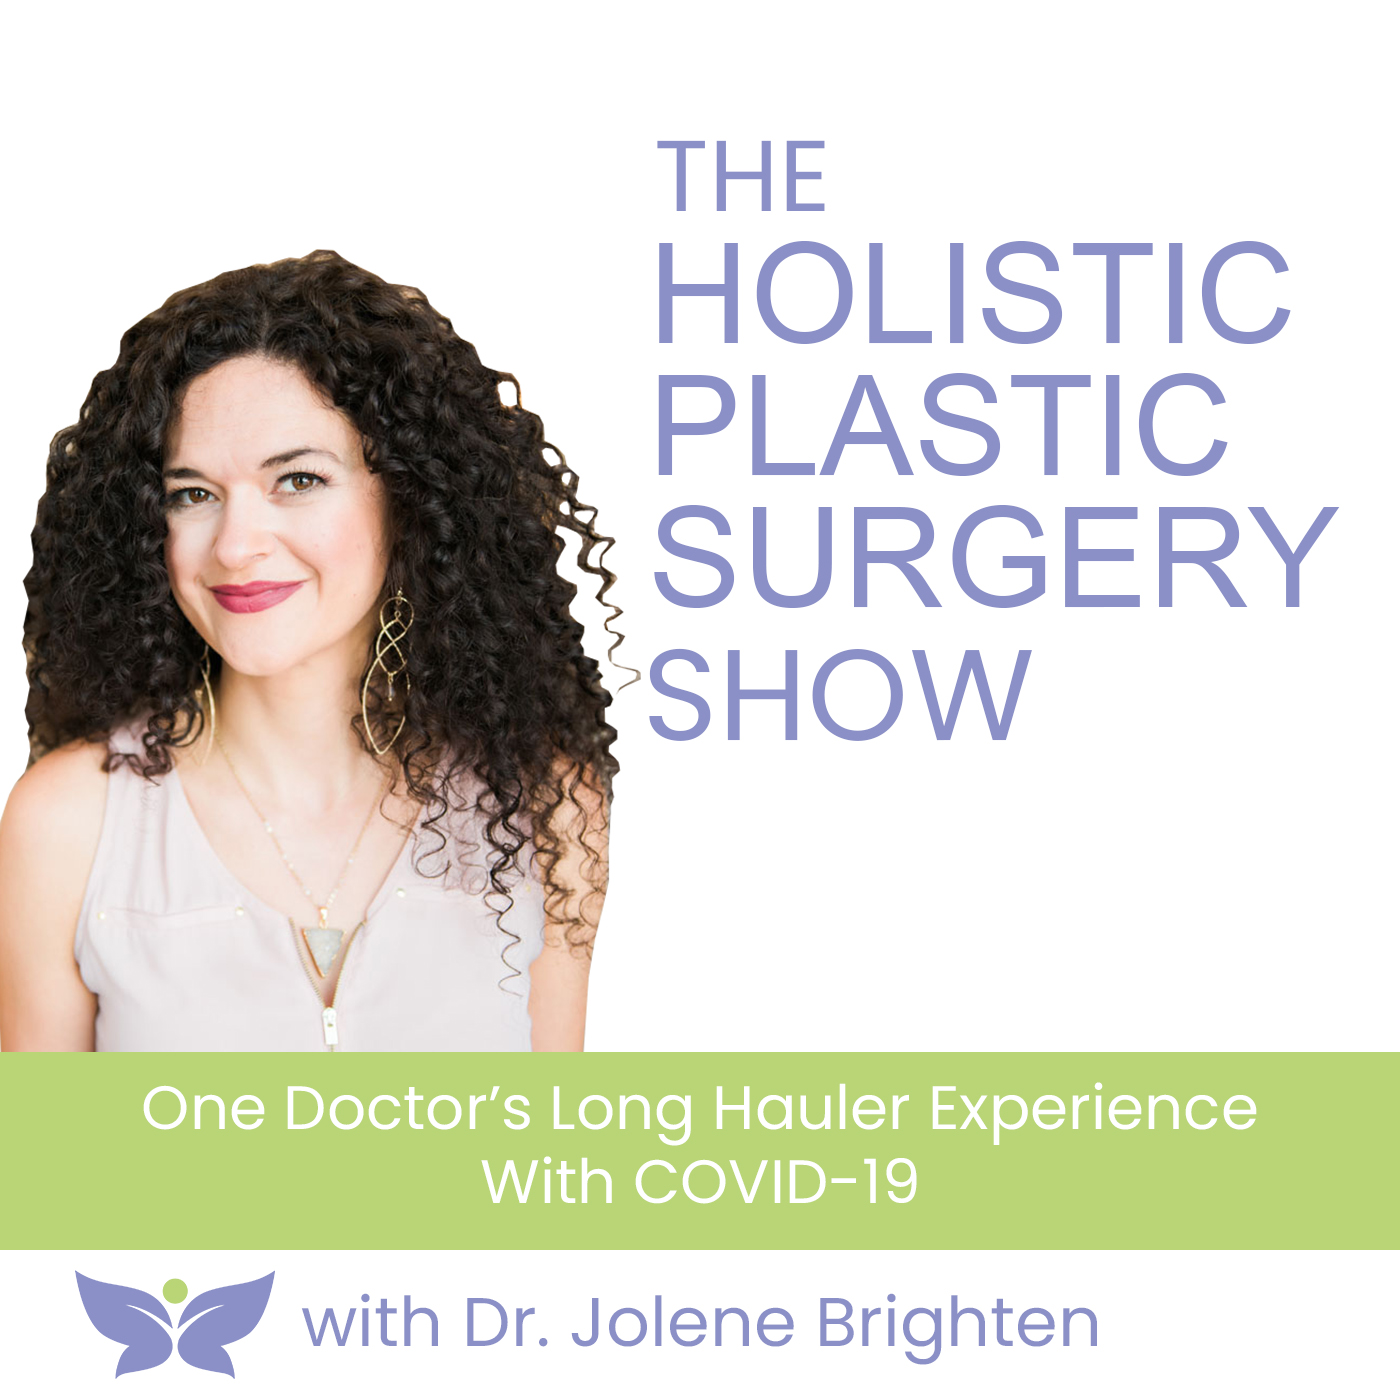 Can Thongs Cause Infections? - Dr. Jolene Brighten